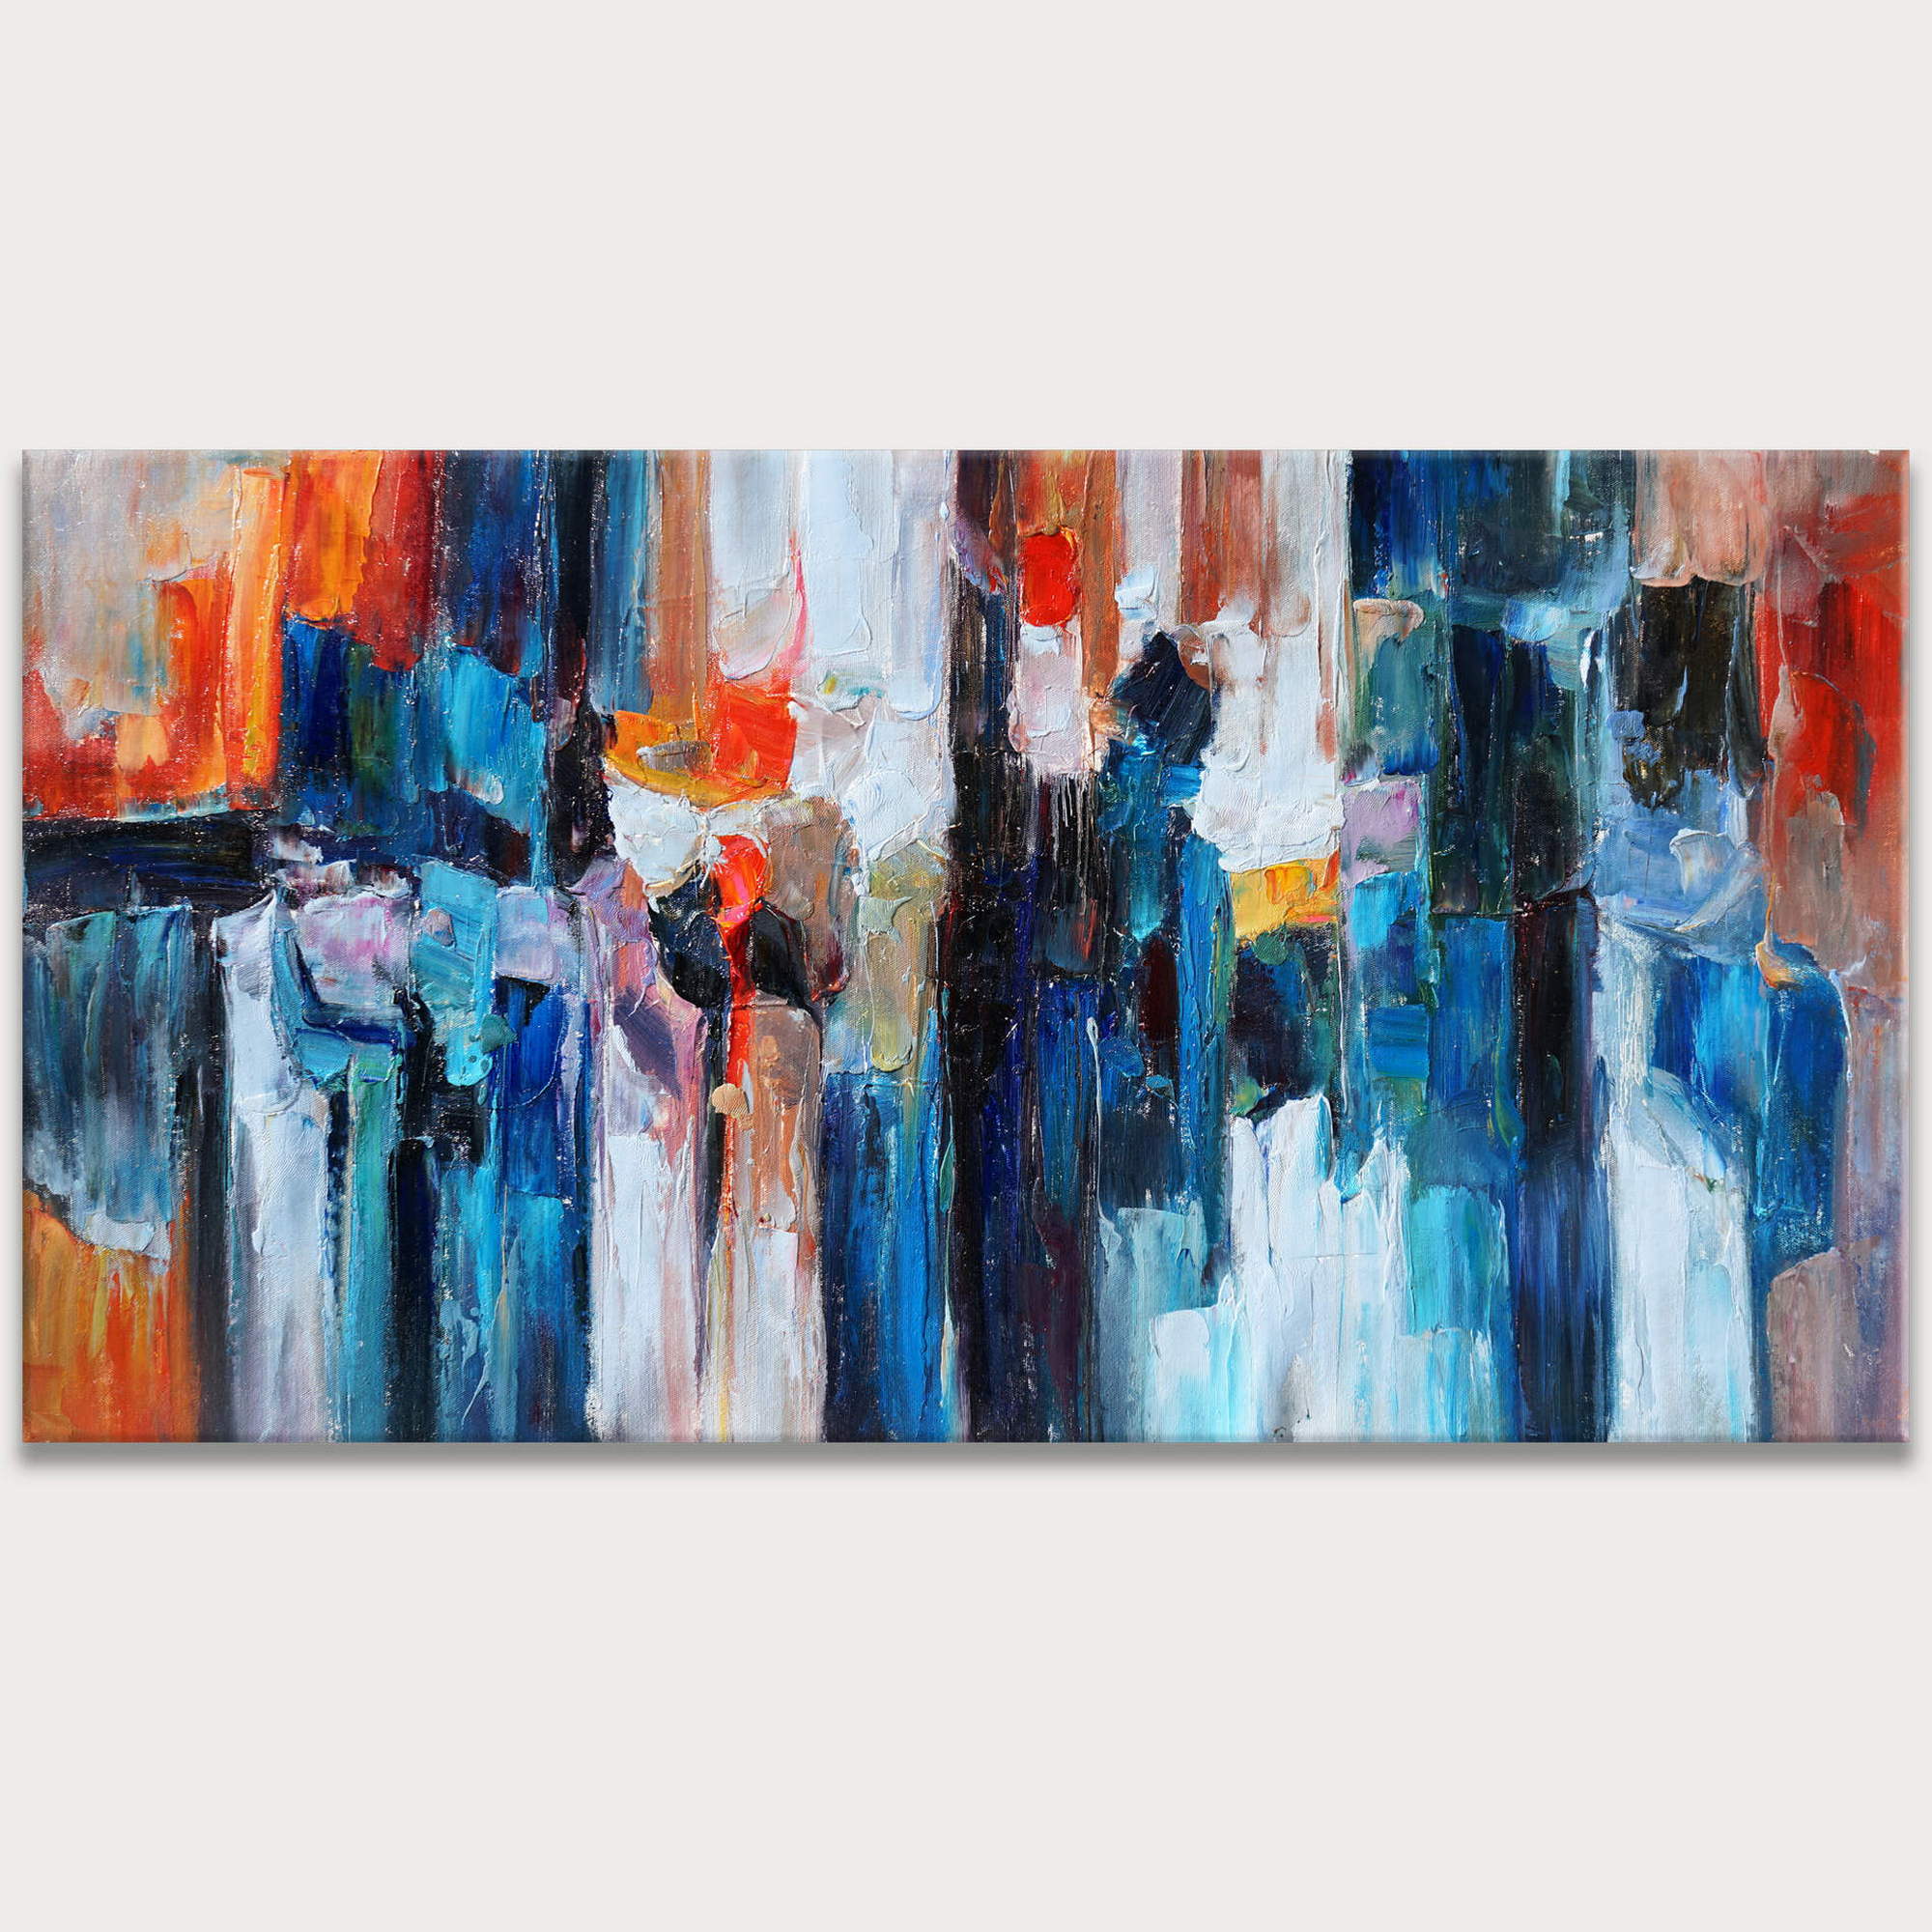 Hand painted Abstract with bright colors 60x120cm